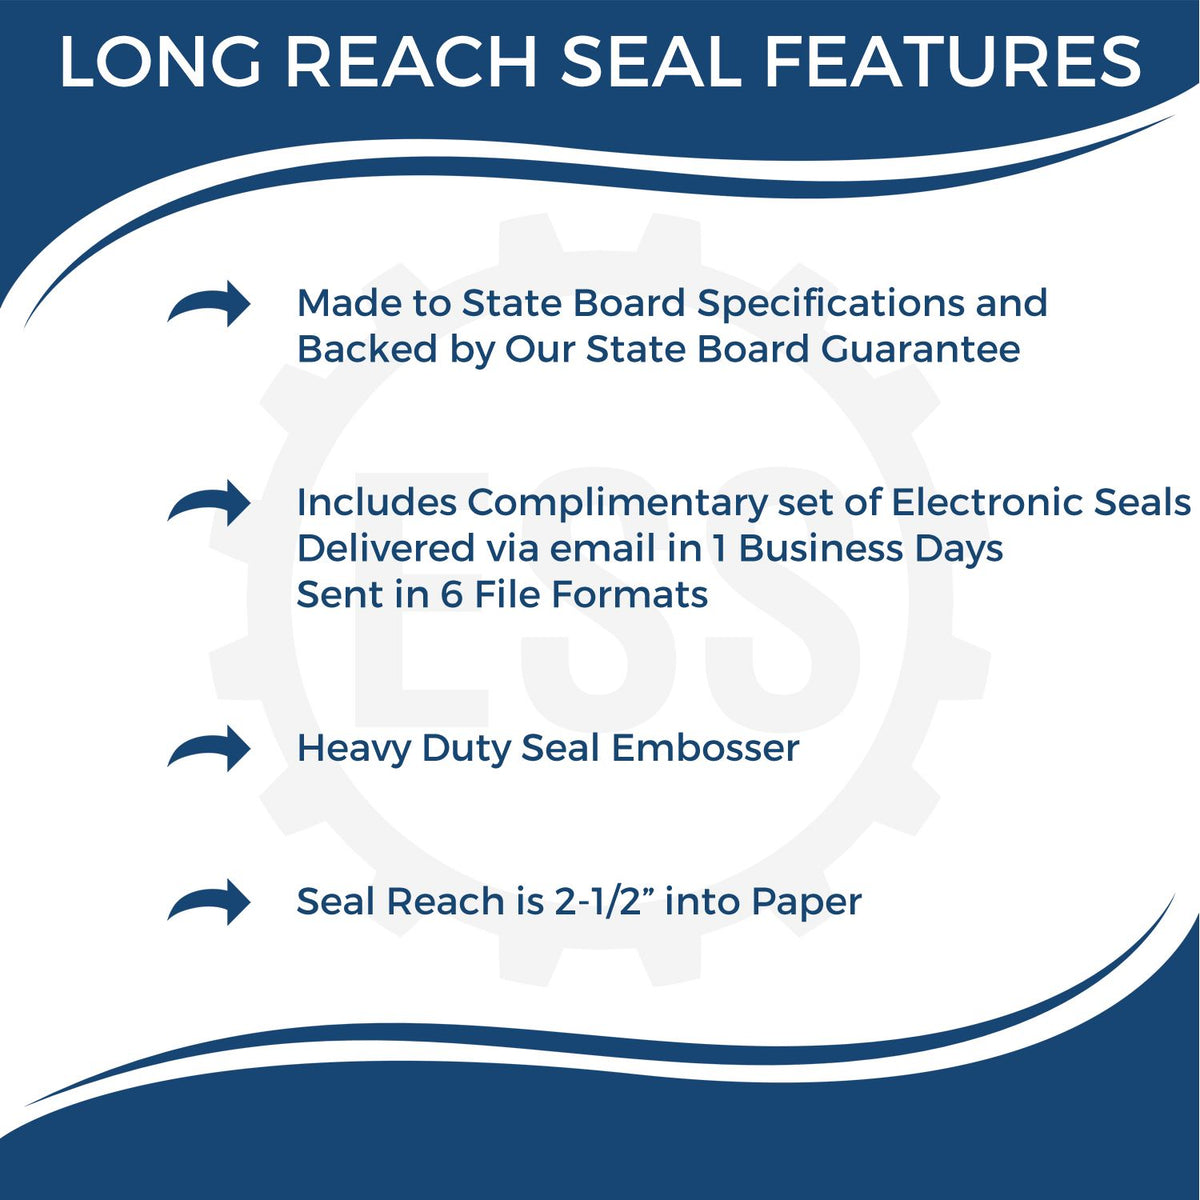 A picture of an infographic highlighting the selling points for the Long Reach Maine Geology Seal